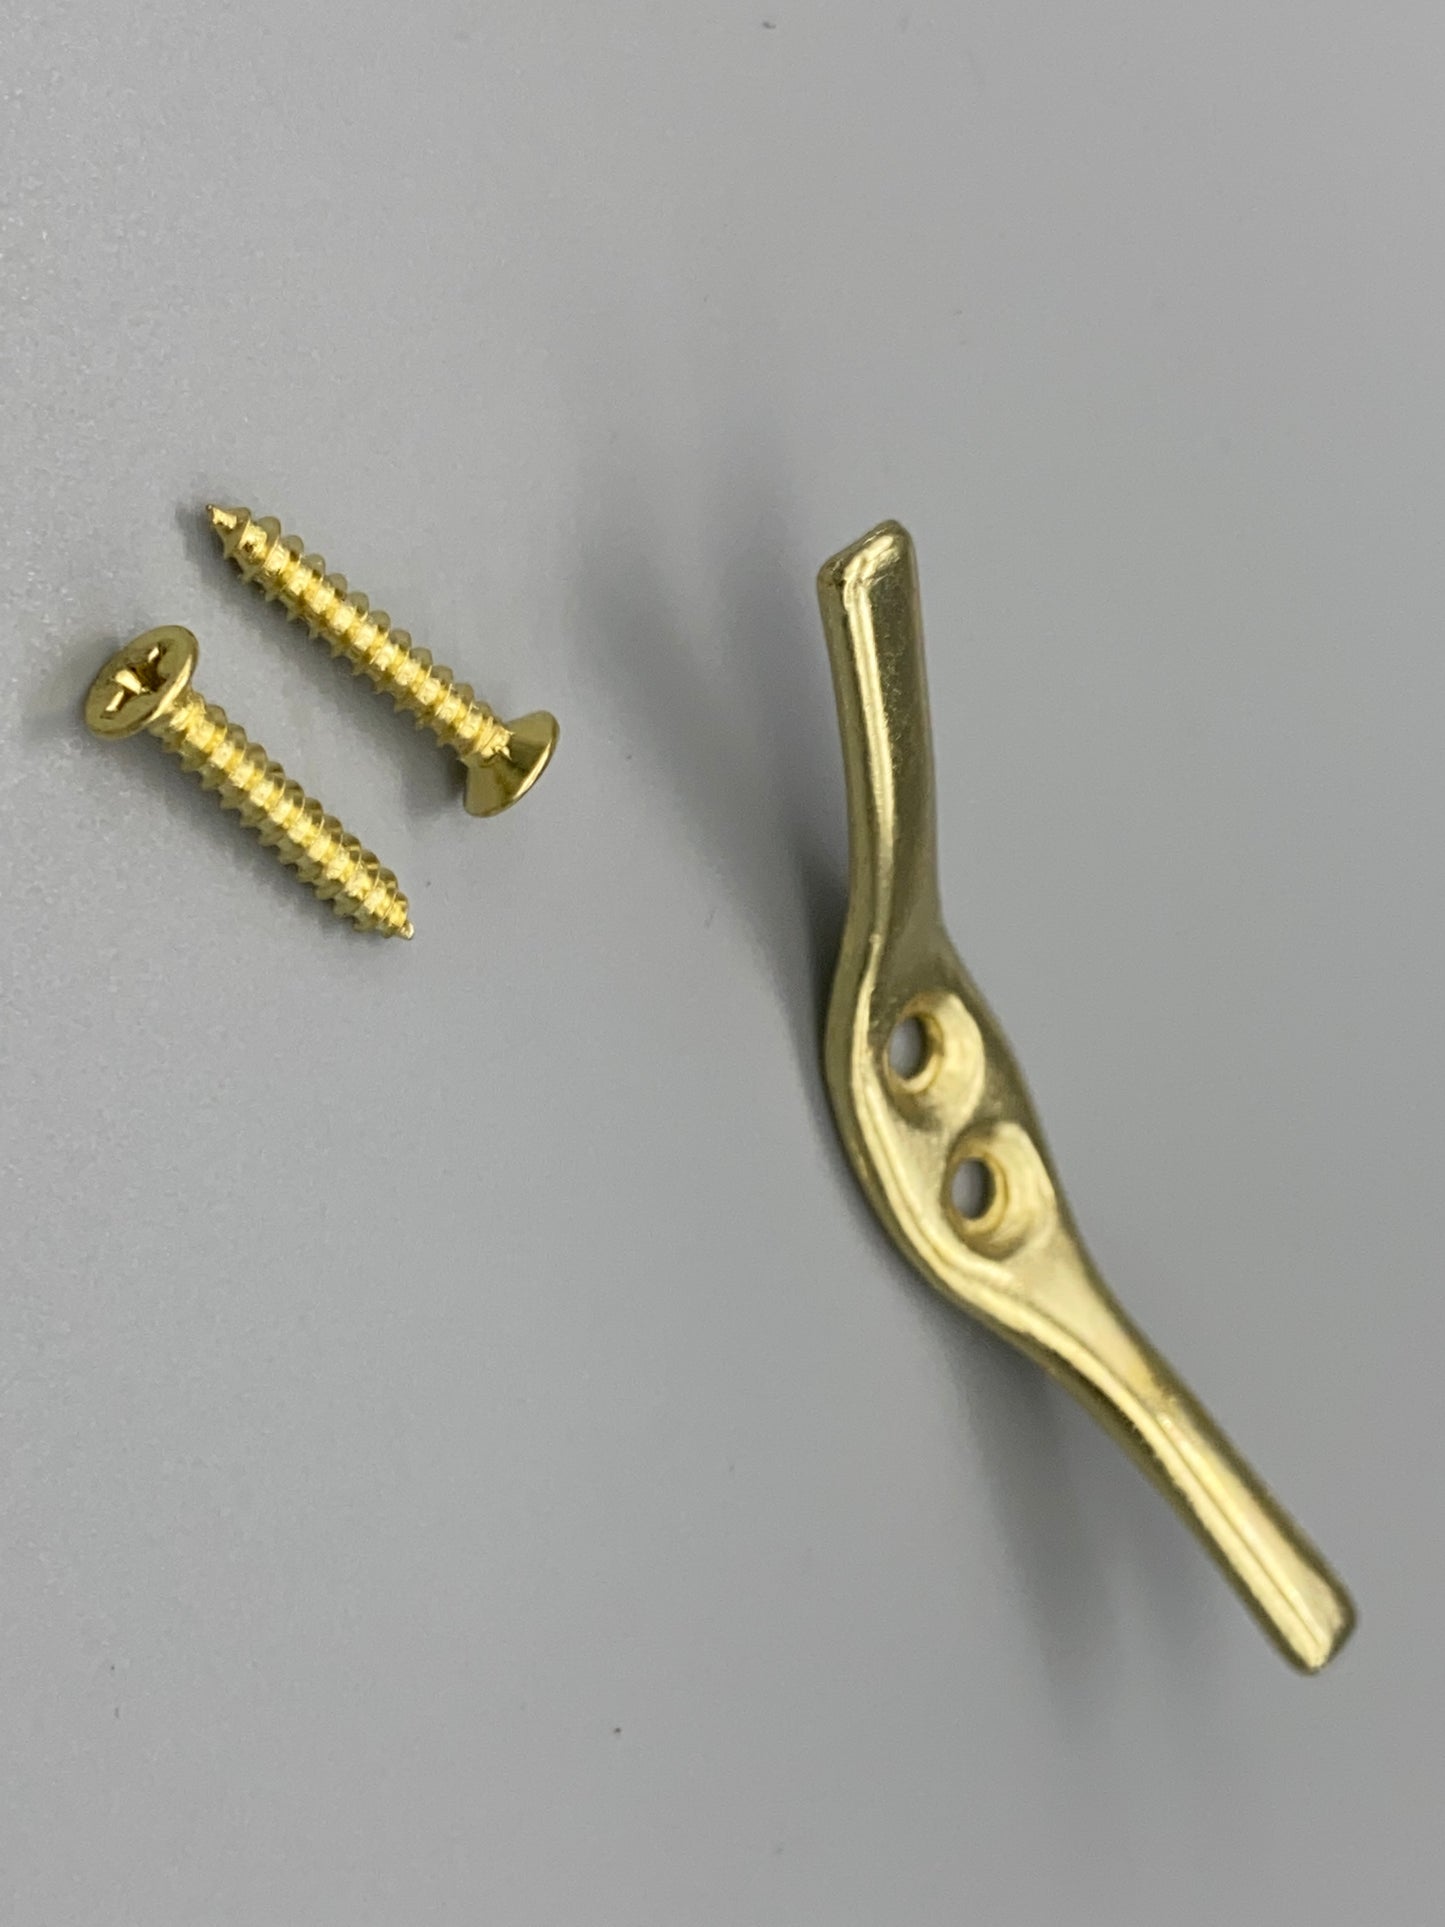 Metal Gold Cord Cleat Safety Device - With Screws - Pack of 3